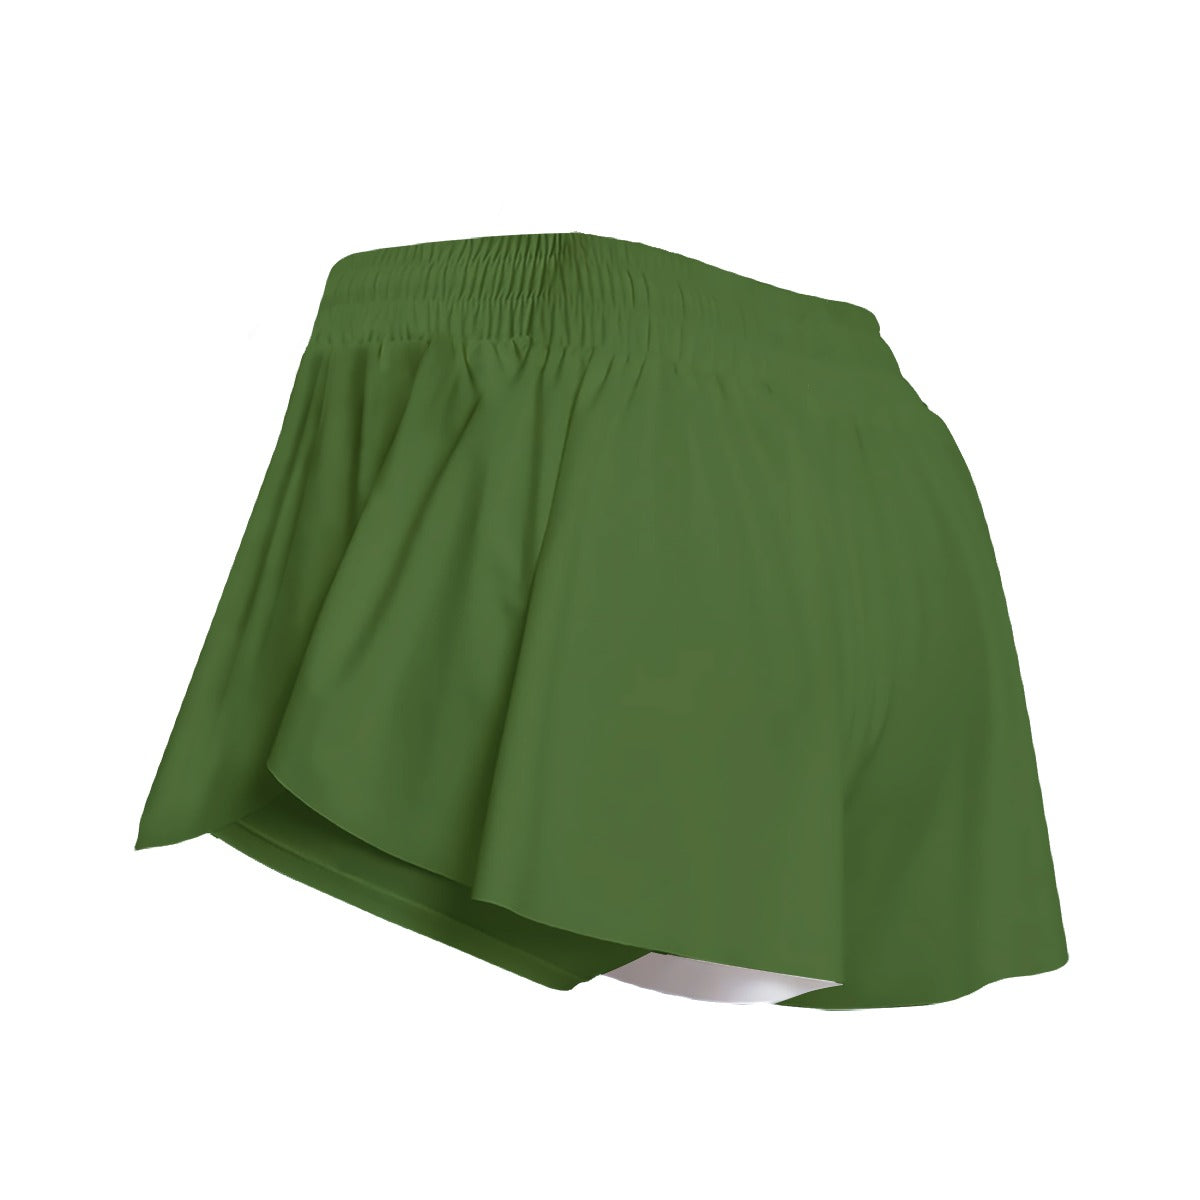 Sixty Eight 93 Logo White Forest Green Women's Sport Skorts With Pocket